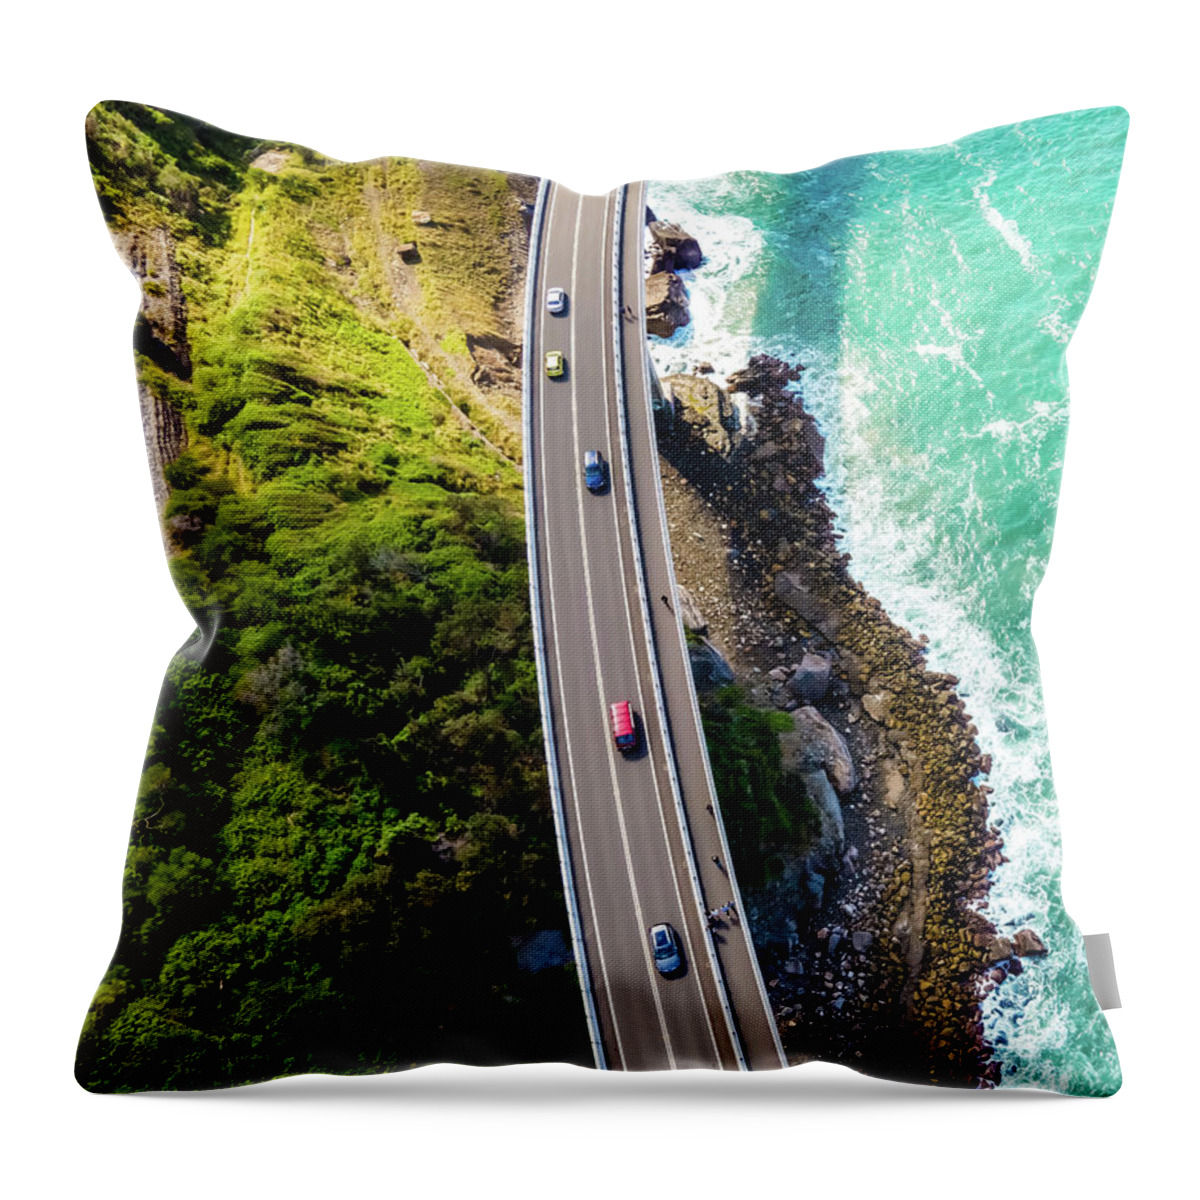 Clouds Throw Pillow featuring the photograph Seacliff Bridge No 1 by Andre Petrov